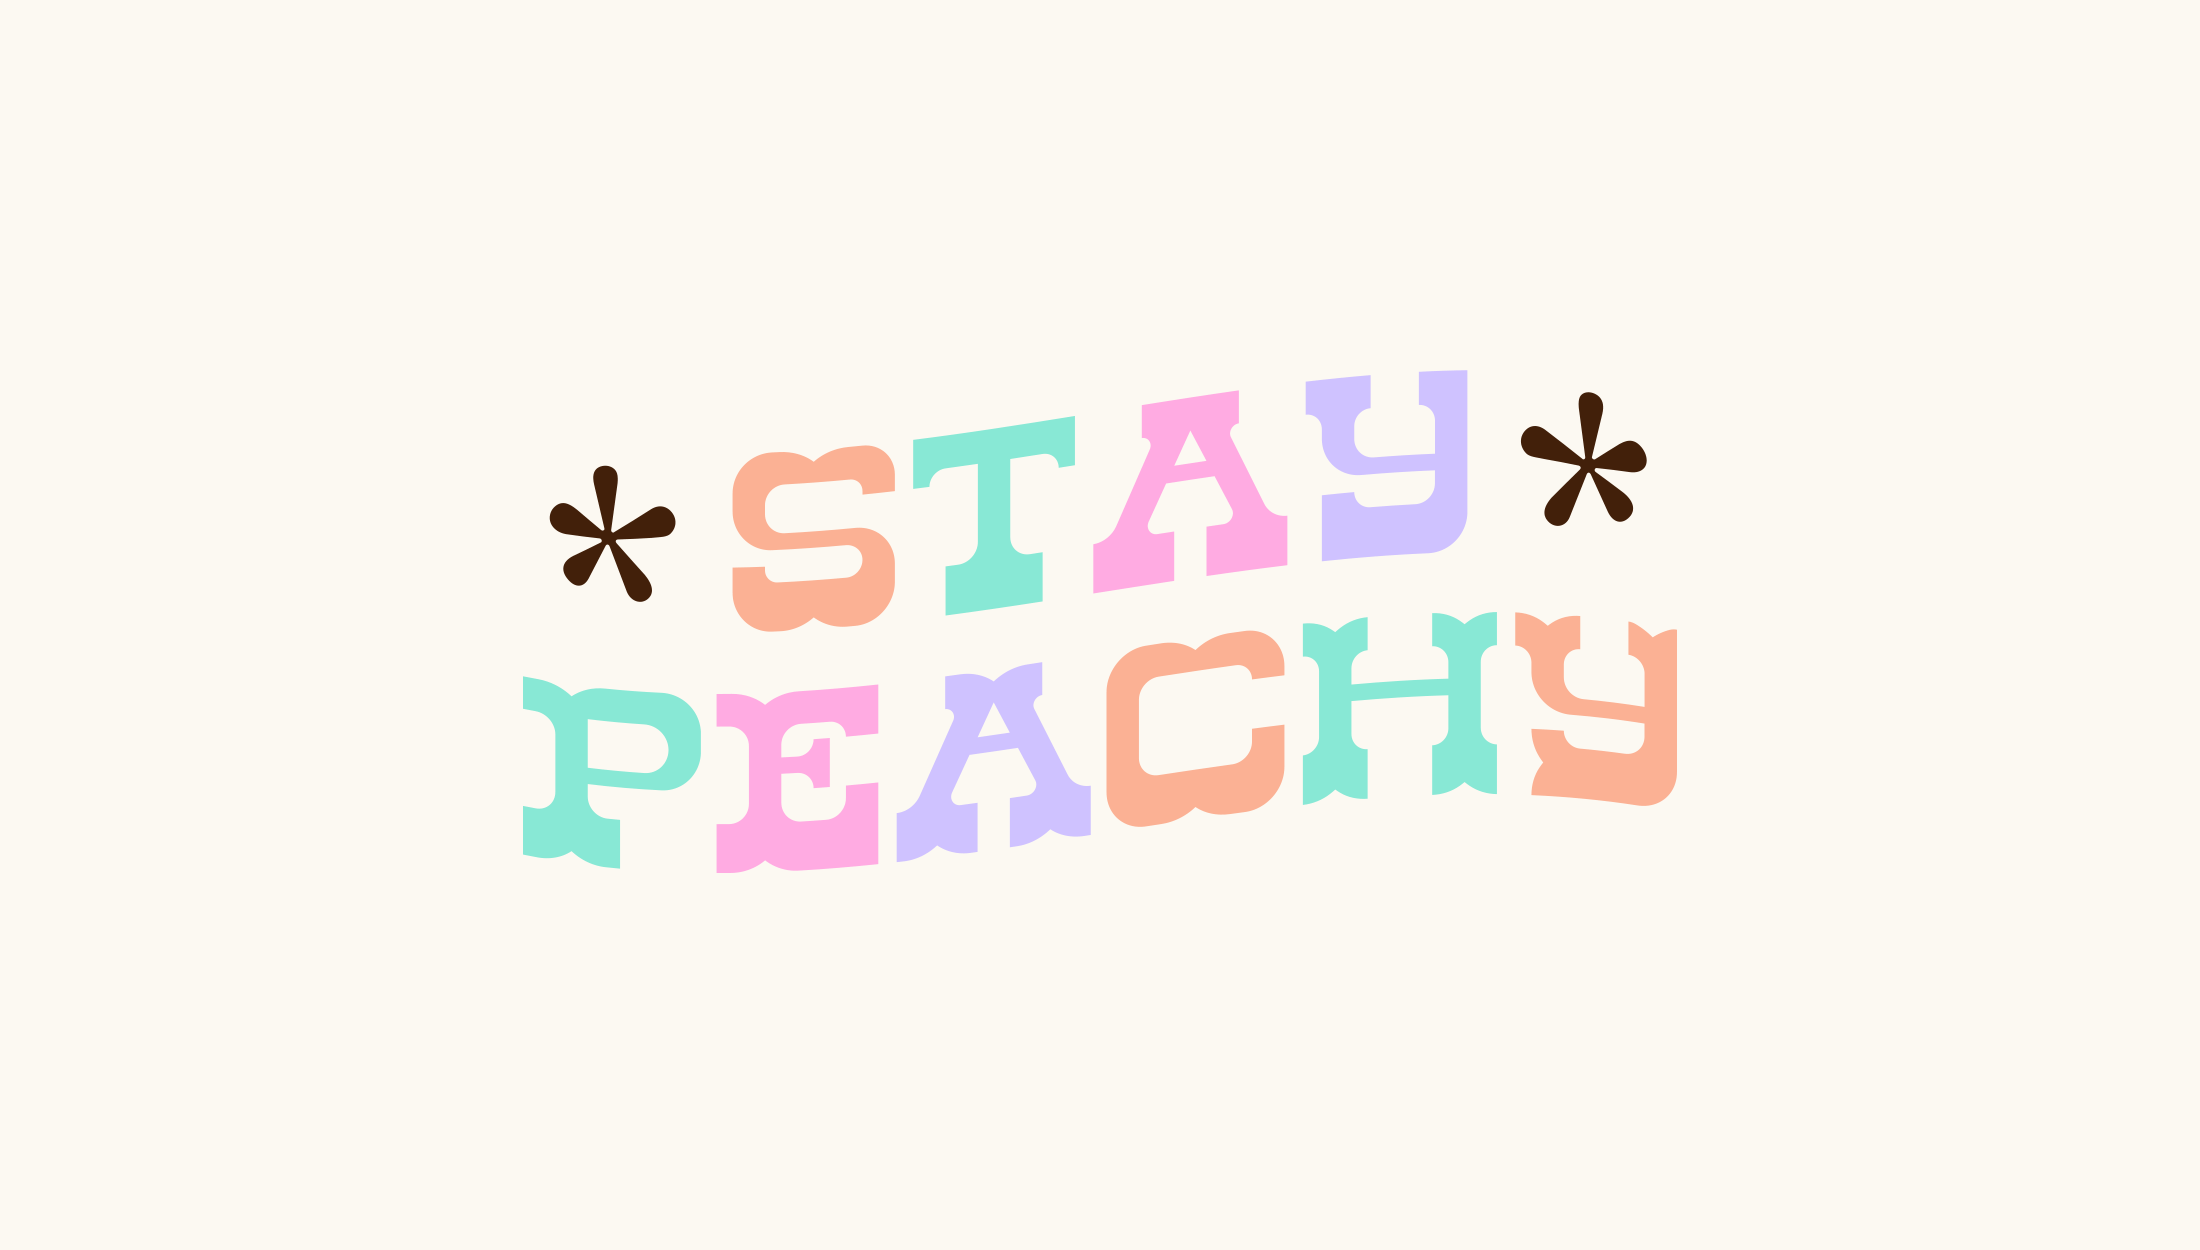 Logo design for Stay Peachy, an online store selling Megan Plays merchandise - designed by Wiltshire-based graphic designer, Kaye Huett